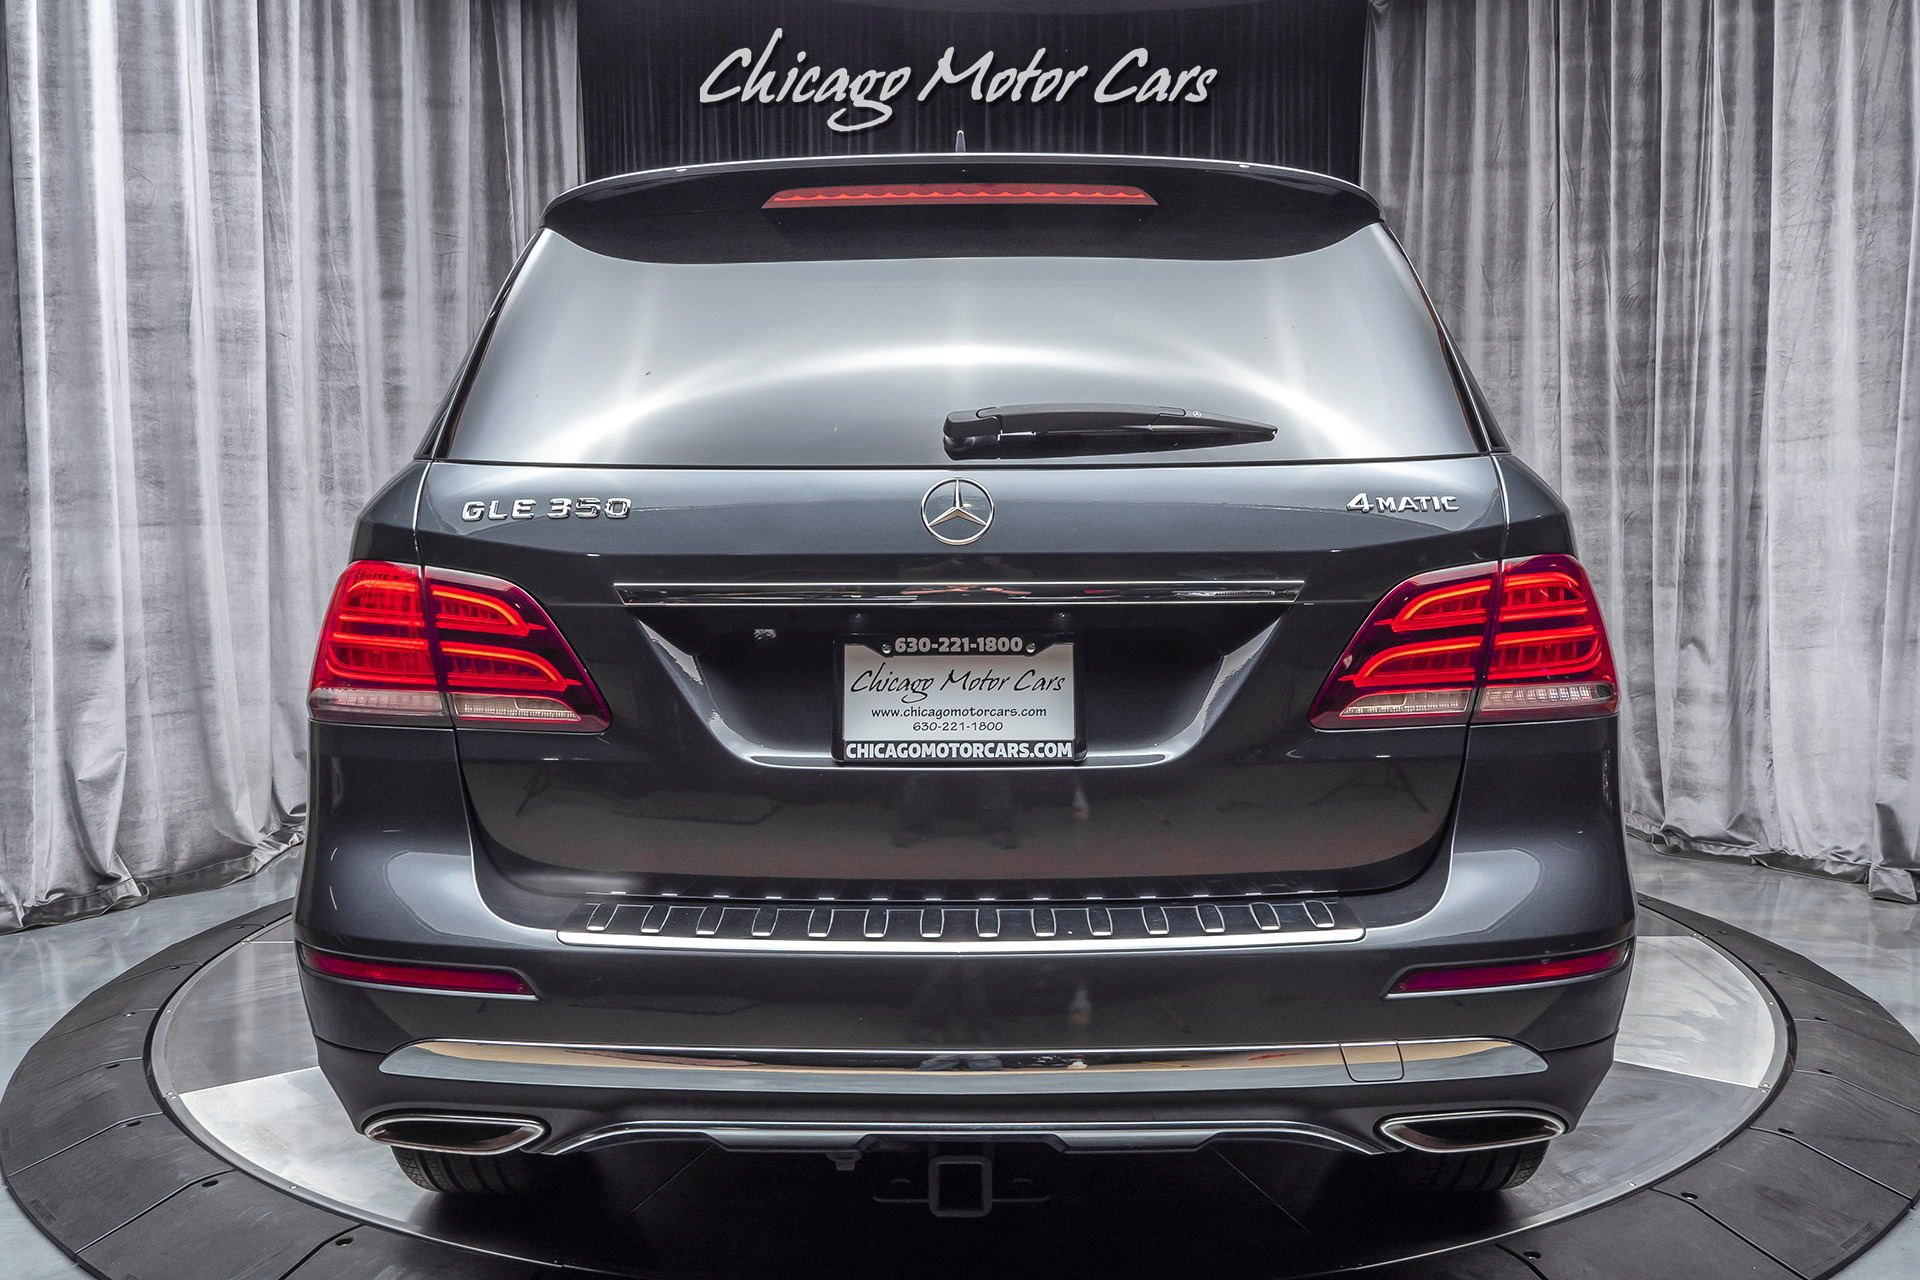 Used-2016-Mercedes-Benz-GLE-350-4MATIC-SUV-MSRP-69K-PREMIUM-PACKAGE-LED-LIGHTING-PACKAGE